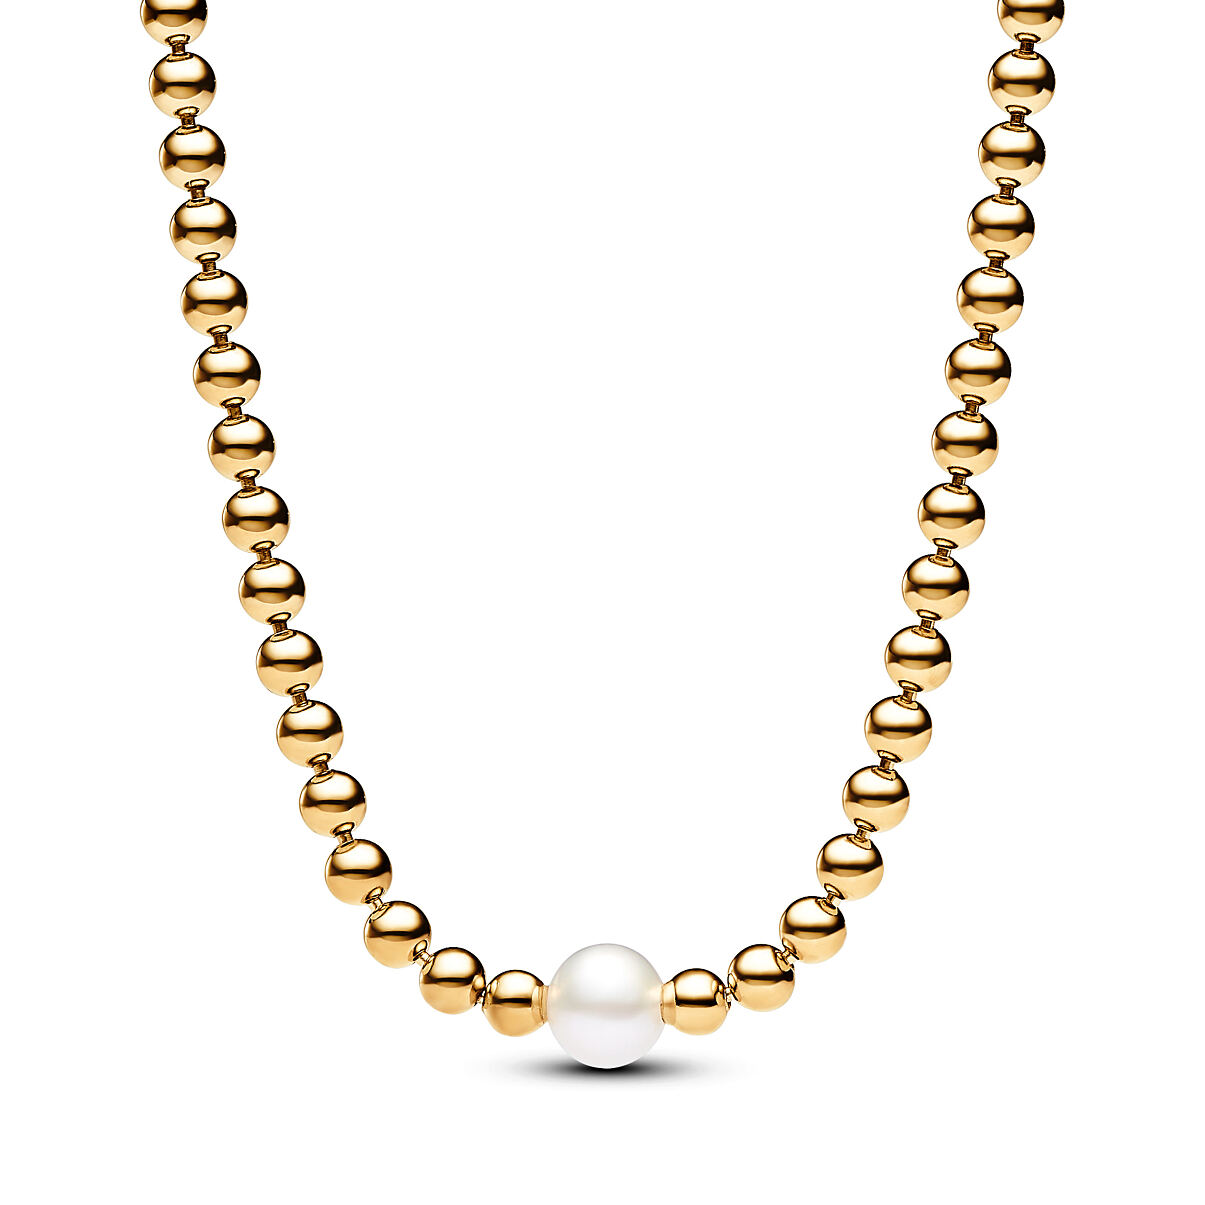 Pandora_Necklace_14k Gold-plated_Freshwater Pearls_Cubic Zirconia_363176C01_199,00 Euro (2)